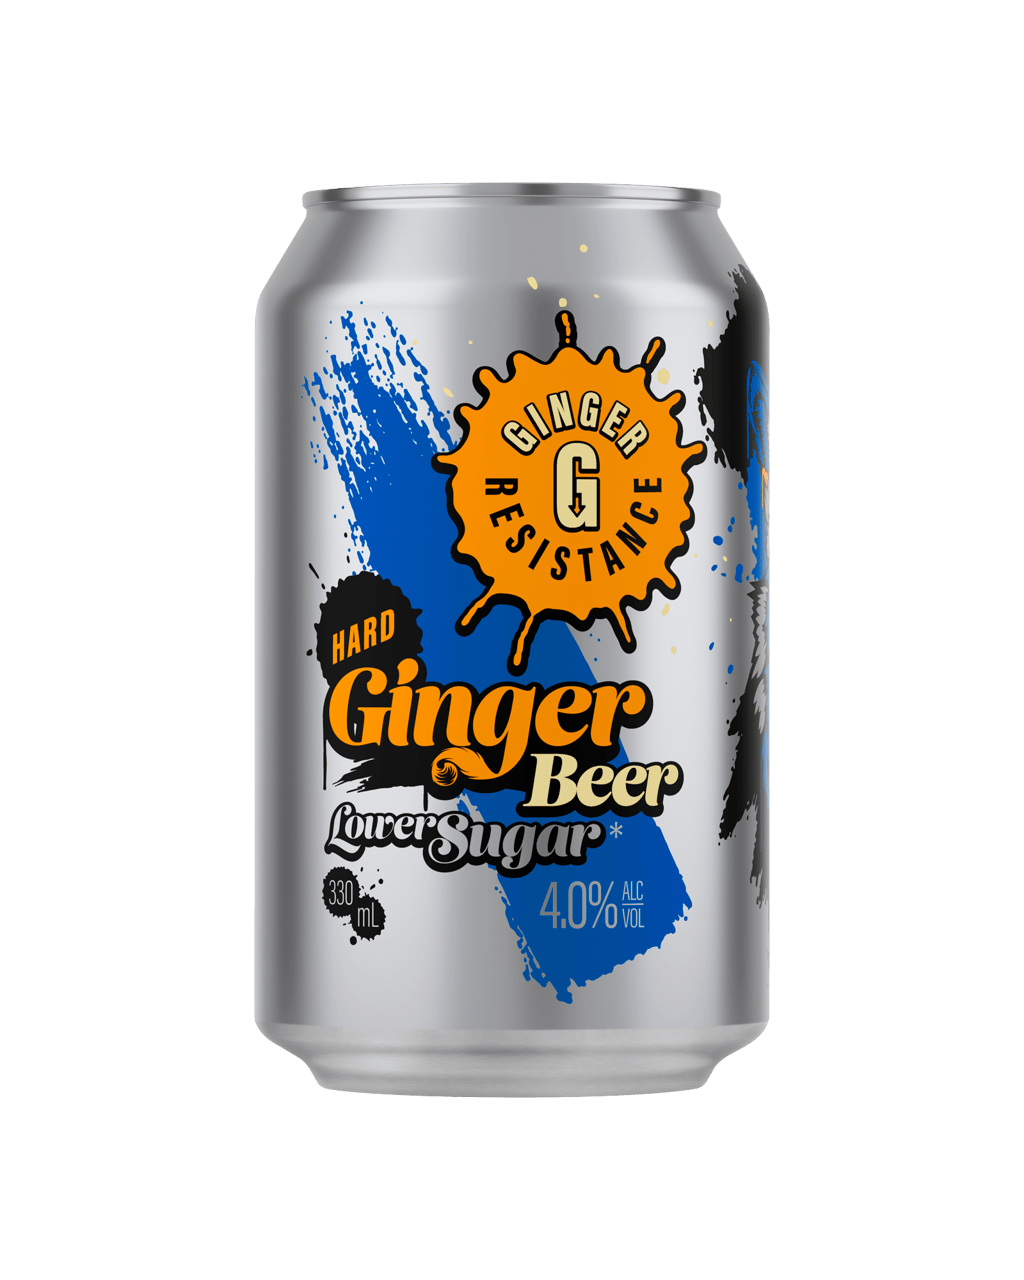 Ginger Resistance Lower Sugar Ginger Beer 330ml Can Unbeatable Prices Buy Online Best Deals 